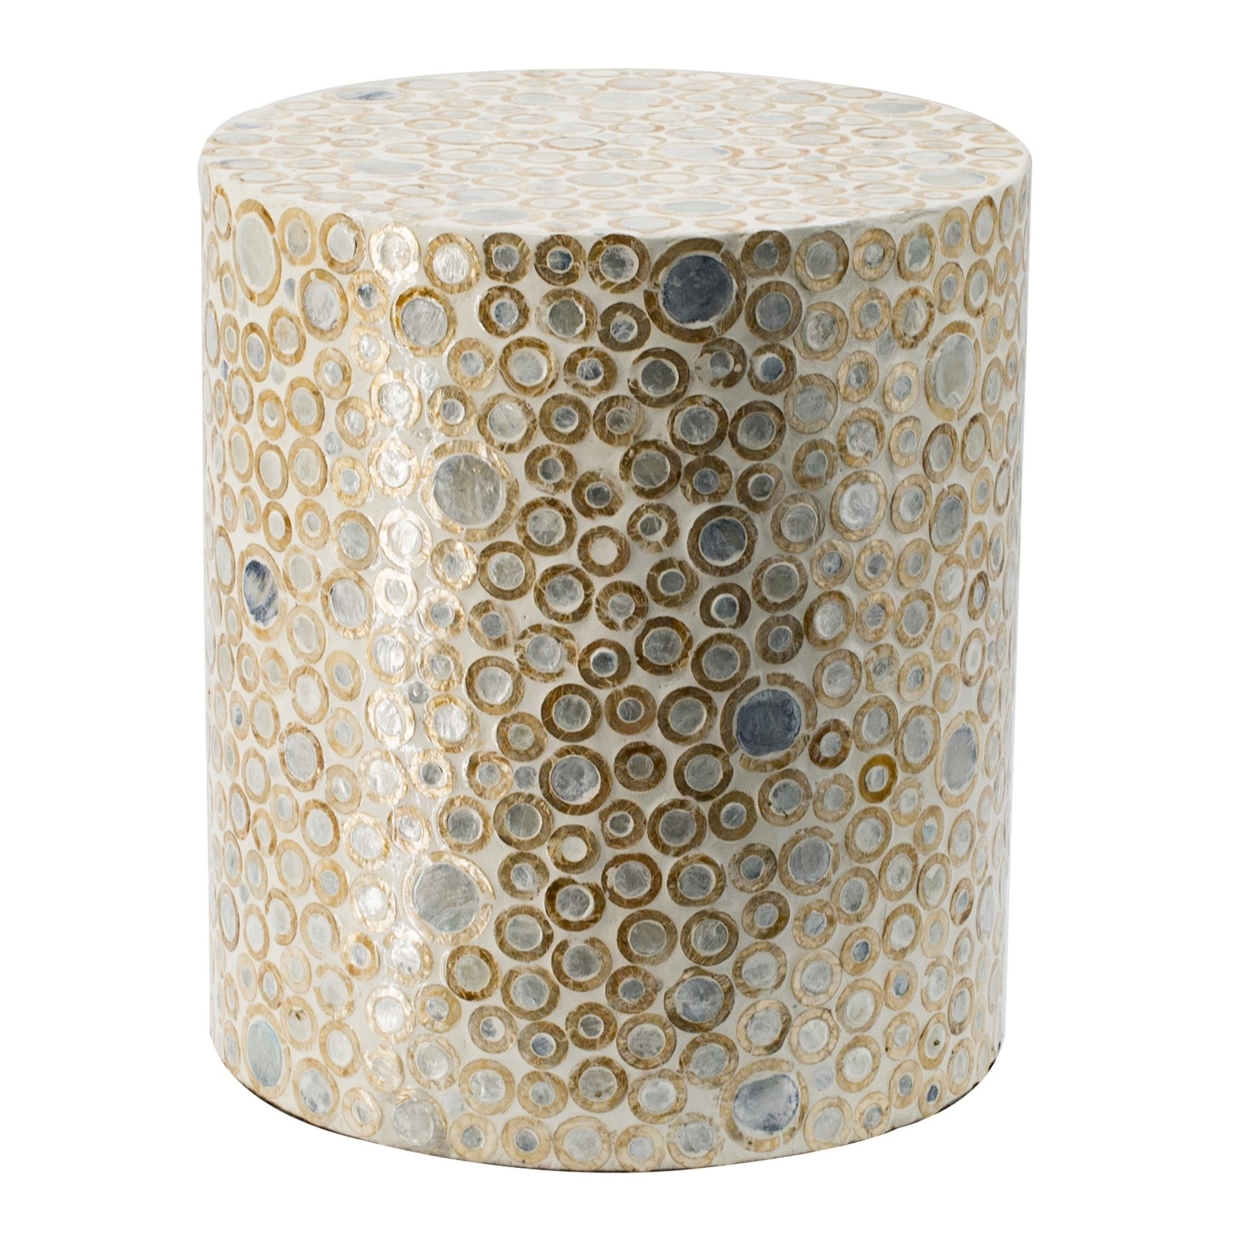 16 Inch Cylindrical Luxury Accent Table Decorative Stool, Blue, Gold, White- Saltoro Sherpi